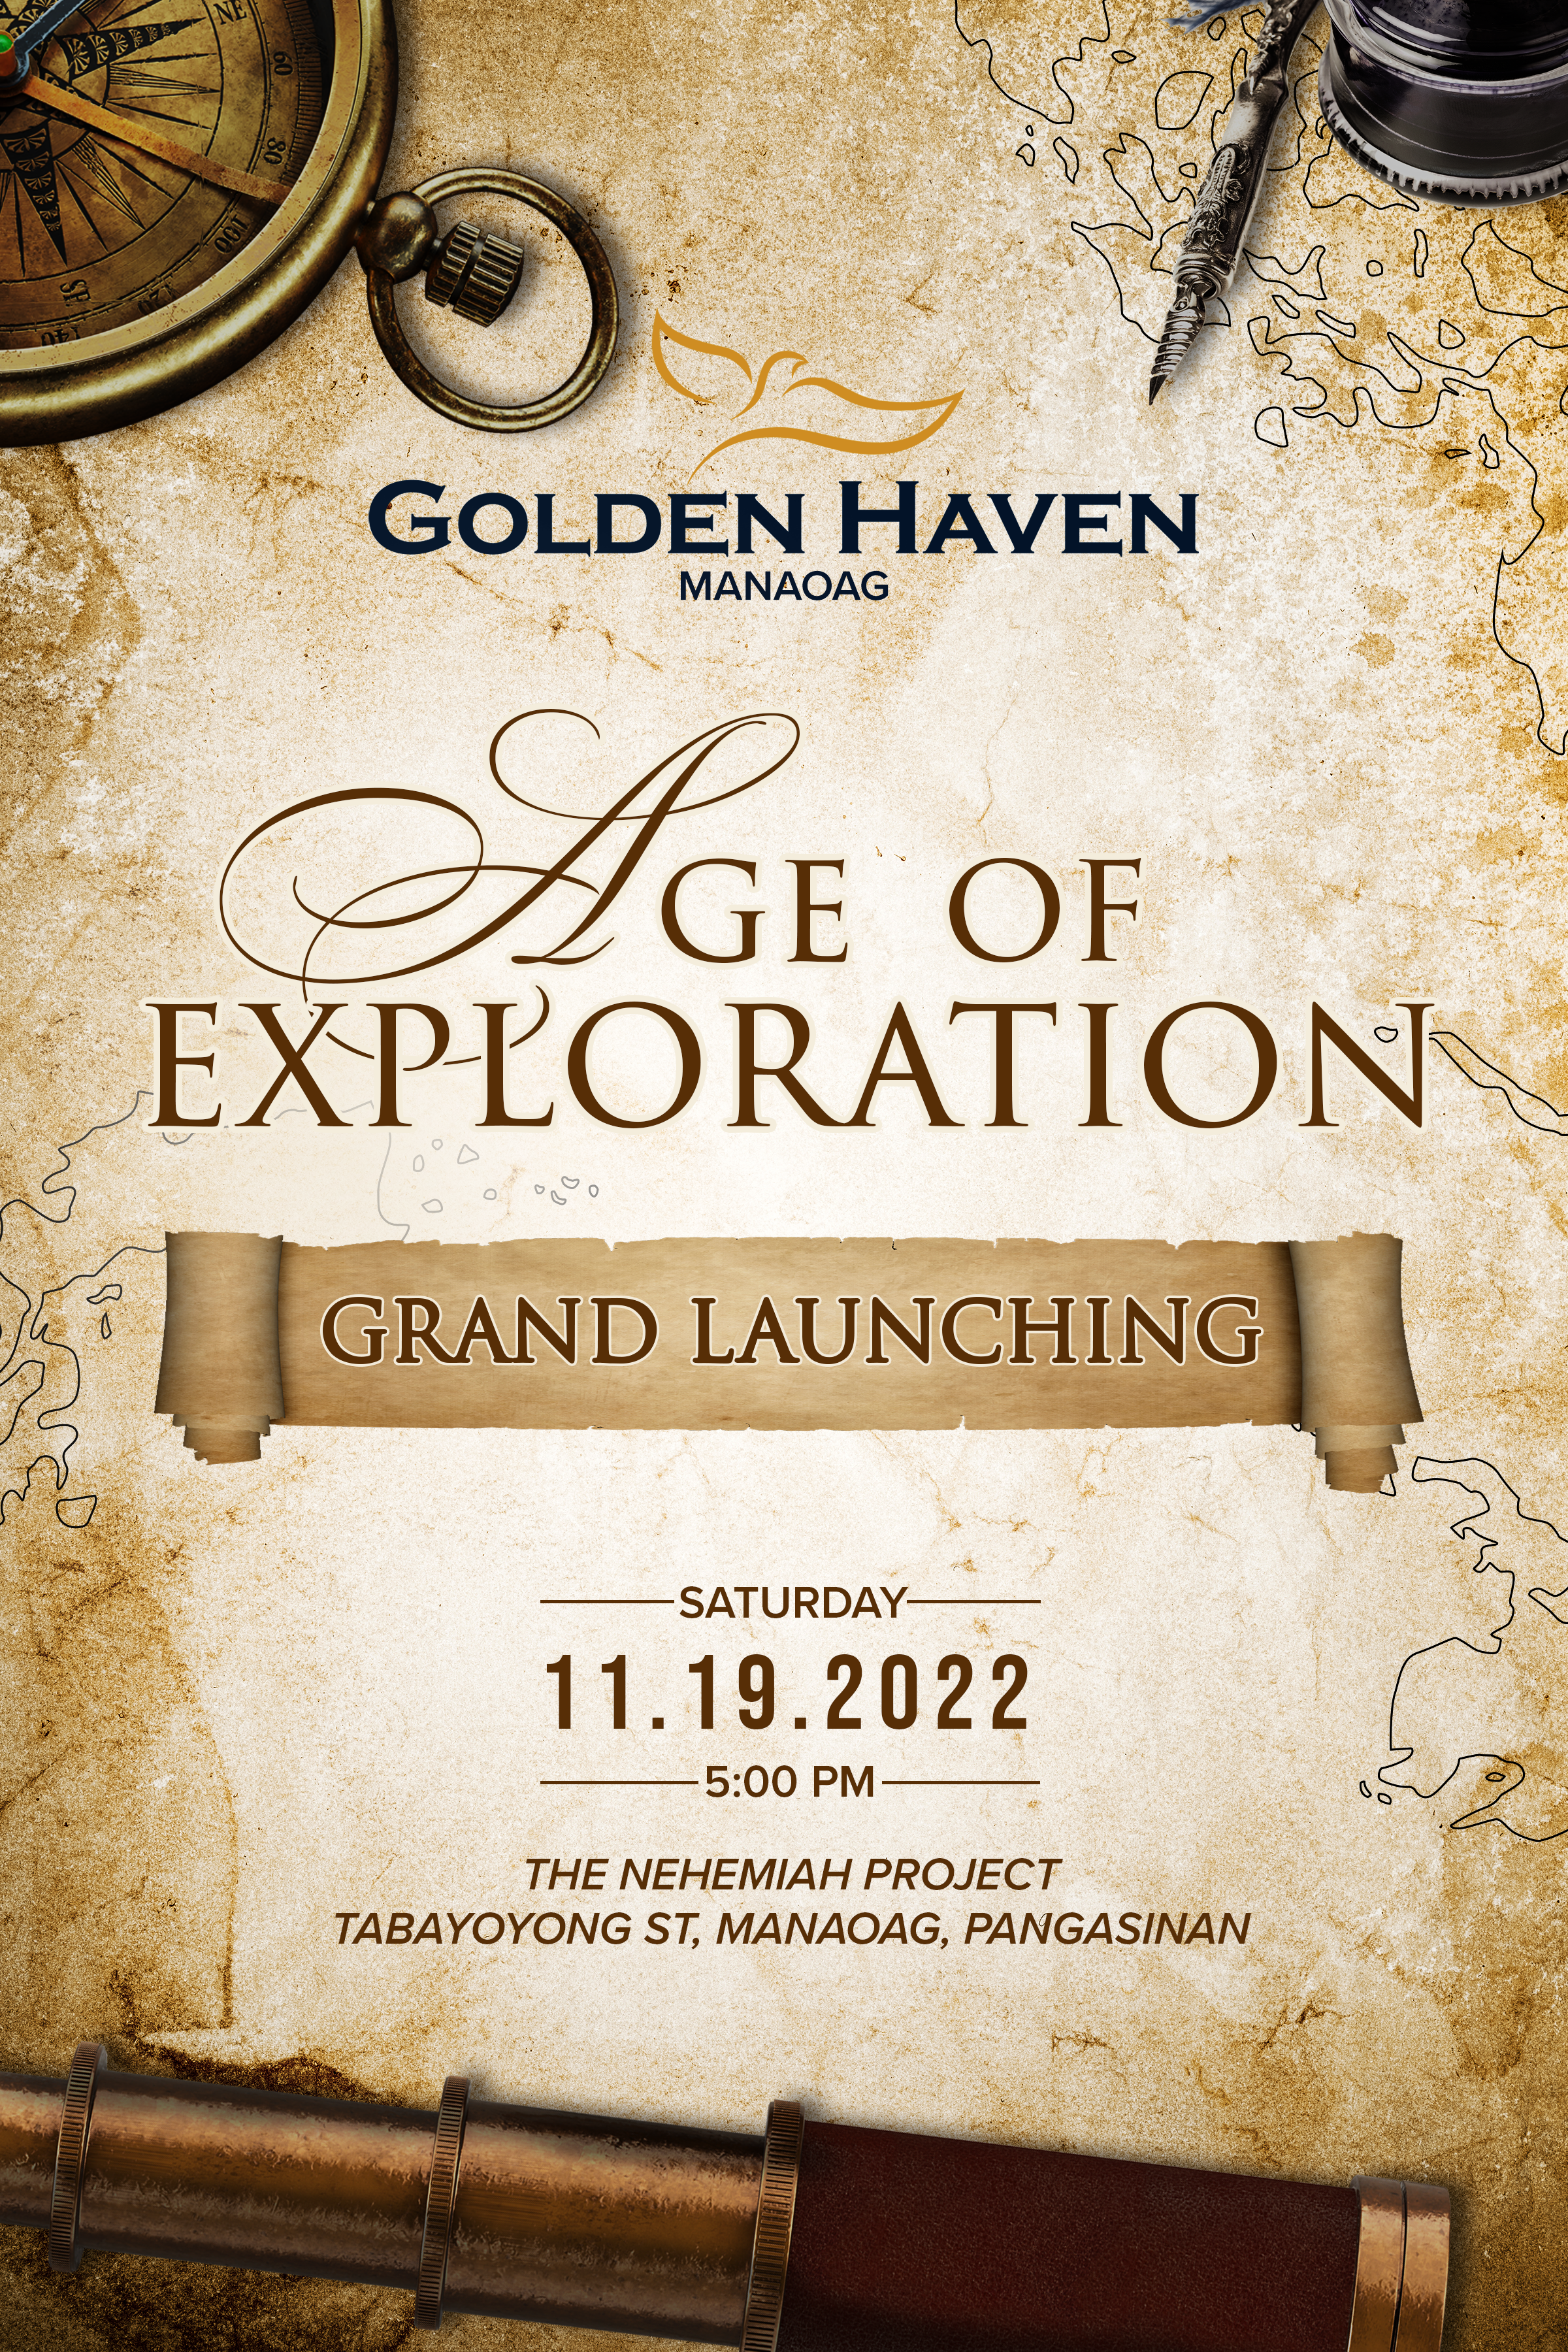 Golden Haven Manaoag Grand Launch